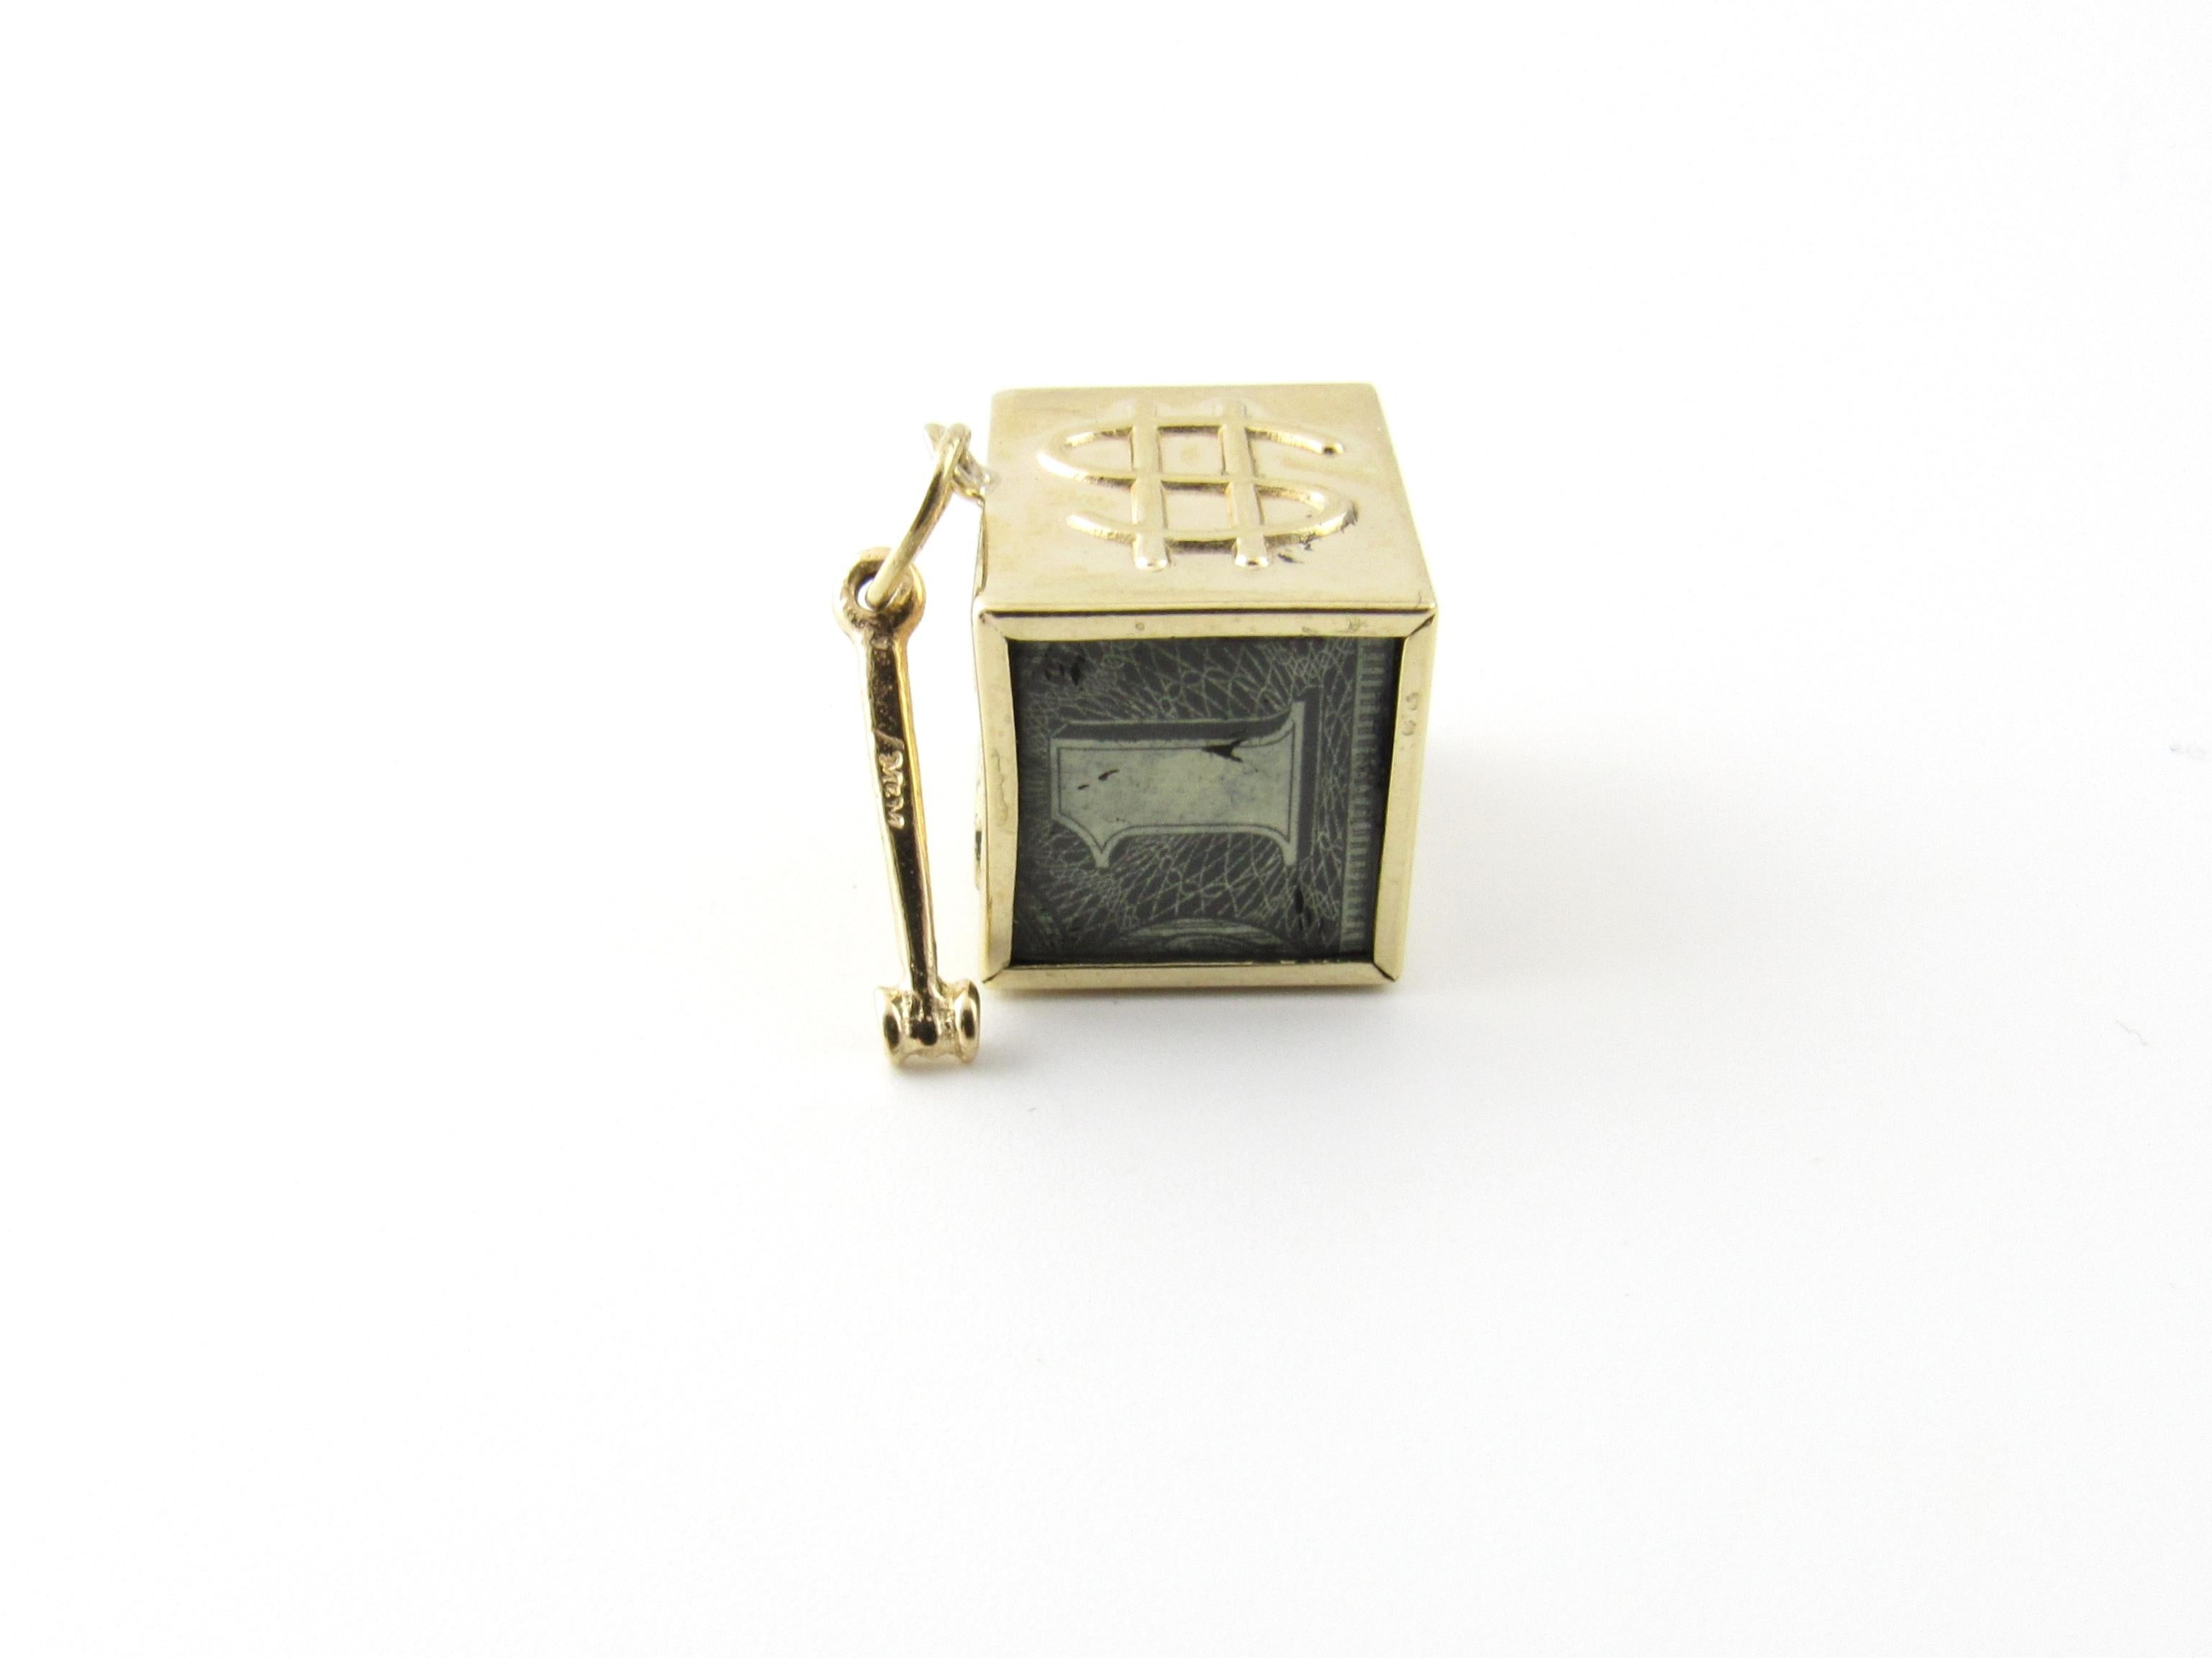 Vintage 14 Karat Yellow Gold Mad Money Charm

Never get caught without your mad money!

This fun charm features a 3D box with a dollar bill encased inside. Complete with tiny hammer to get the job done! Meticulously detailed in 14K yellow